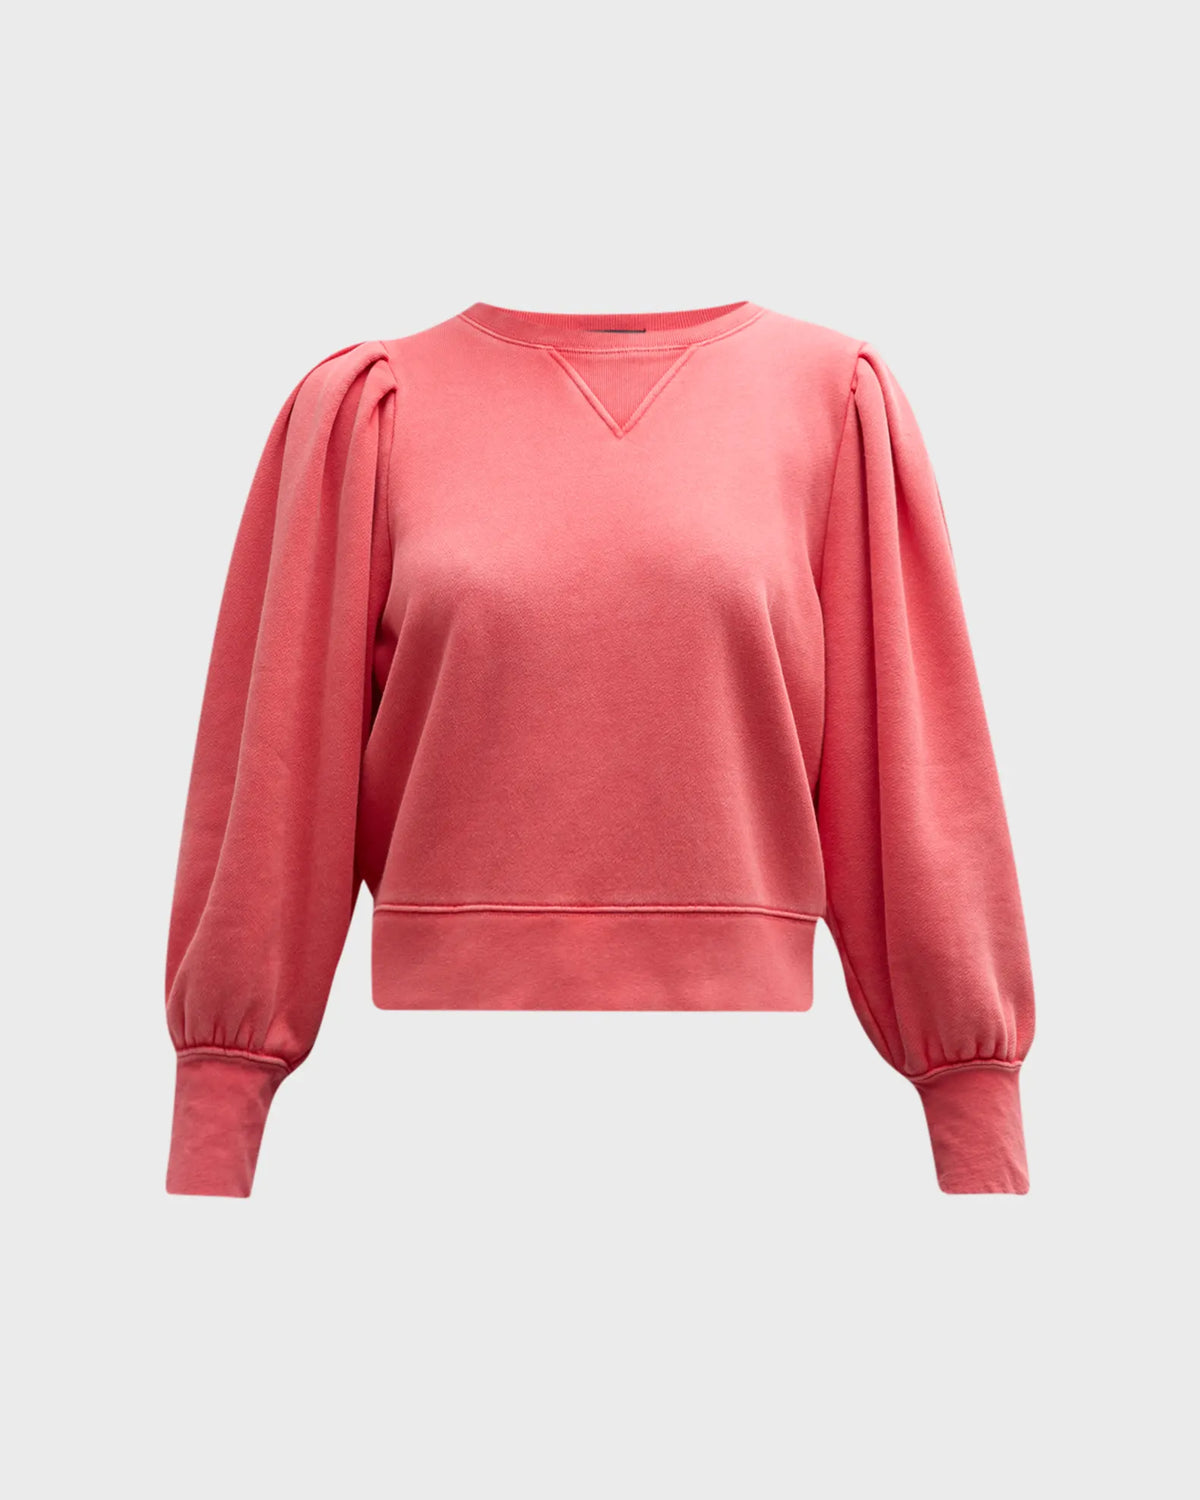 Coral sweatshirt with long volumous sleeves and pleated arms at the shoulders with ribbed cuffs and hem and crew neck 